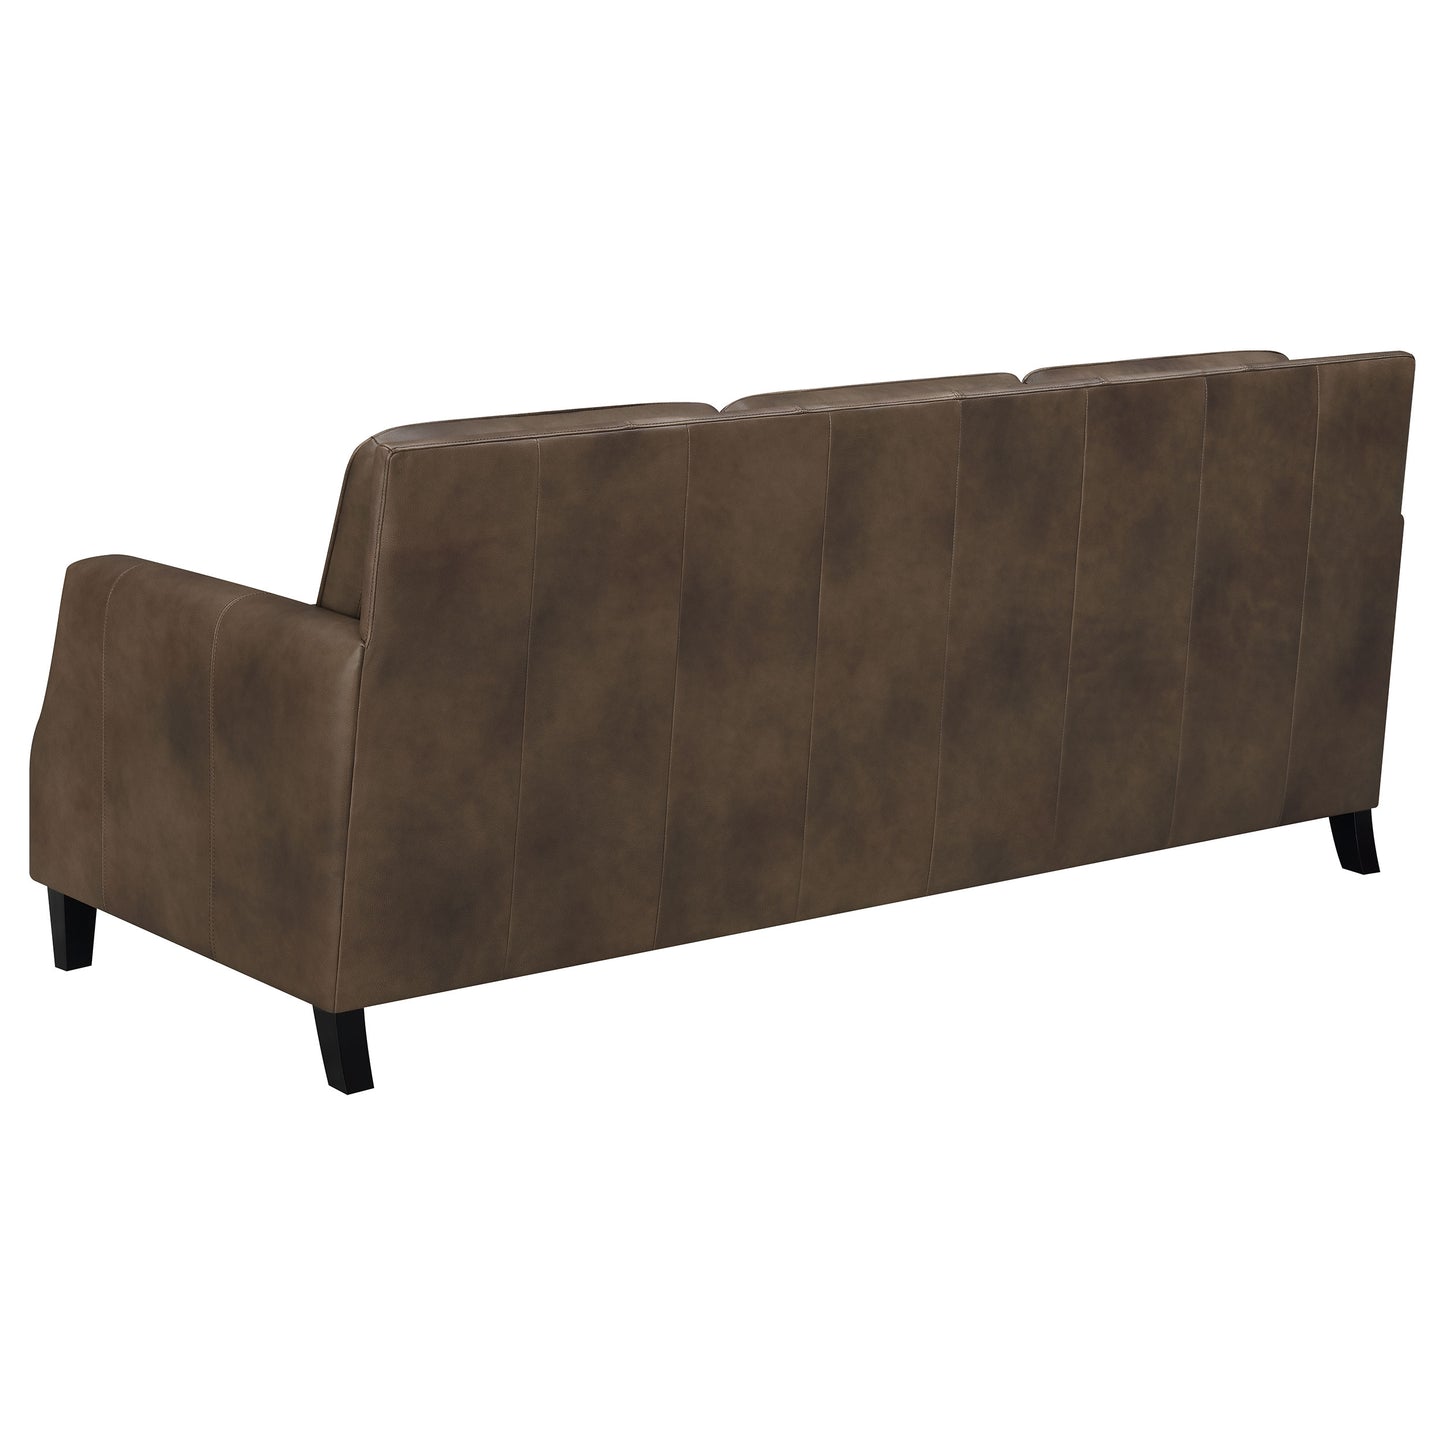 Leaton 3-piece Upholstered Recessed Arm Sofa Set Brown Sugar